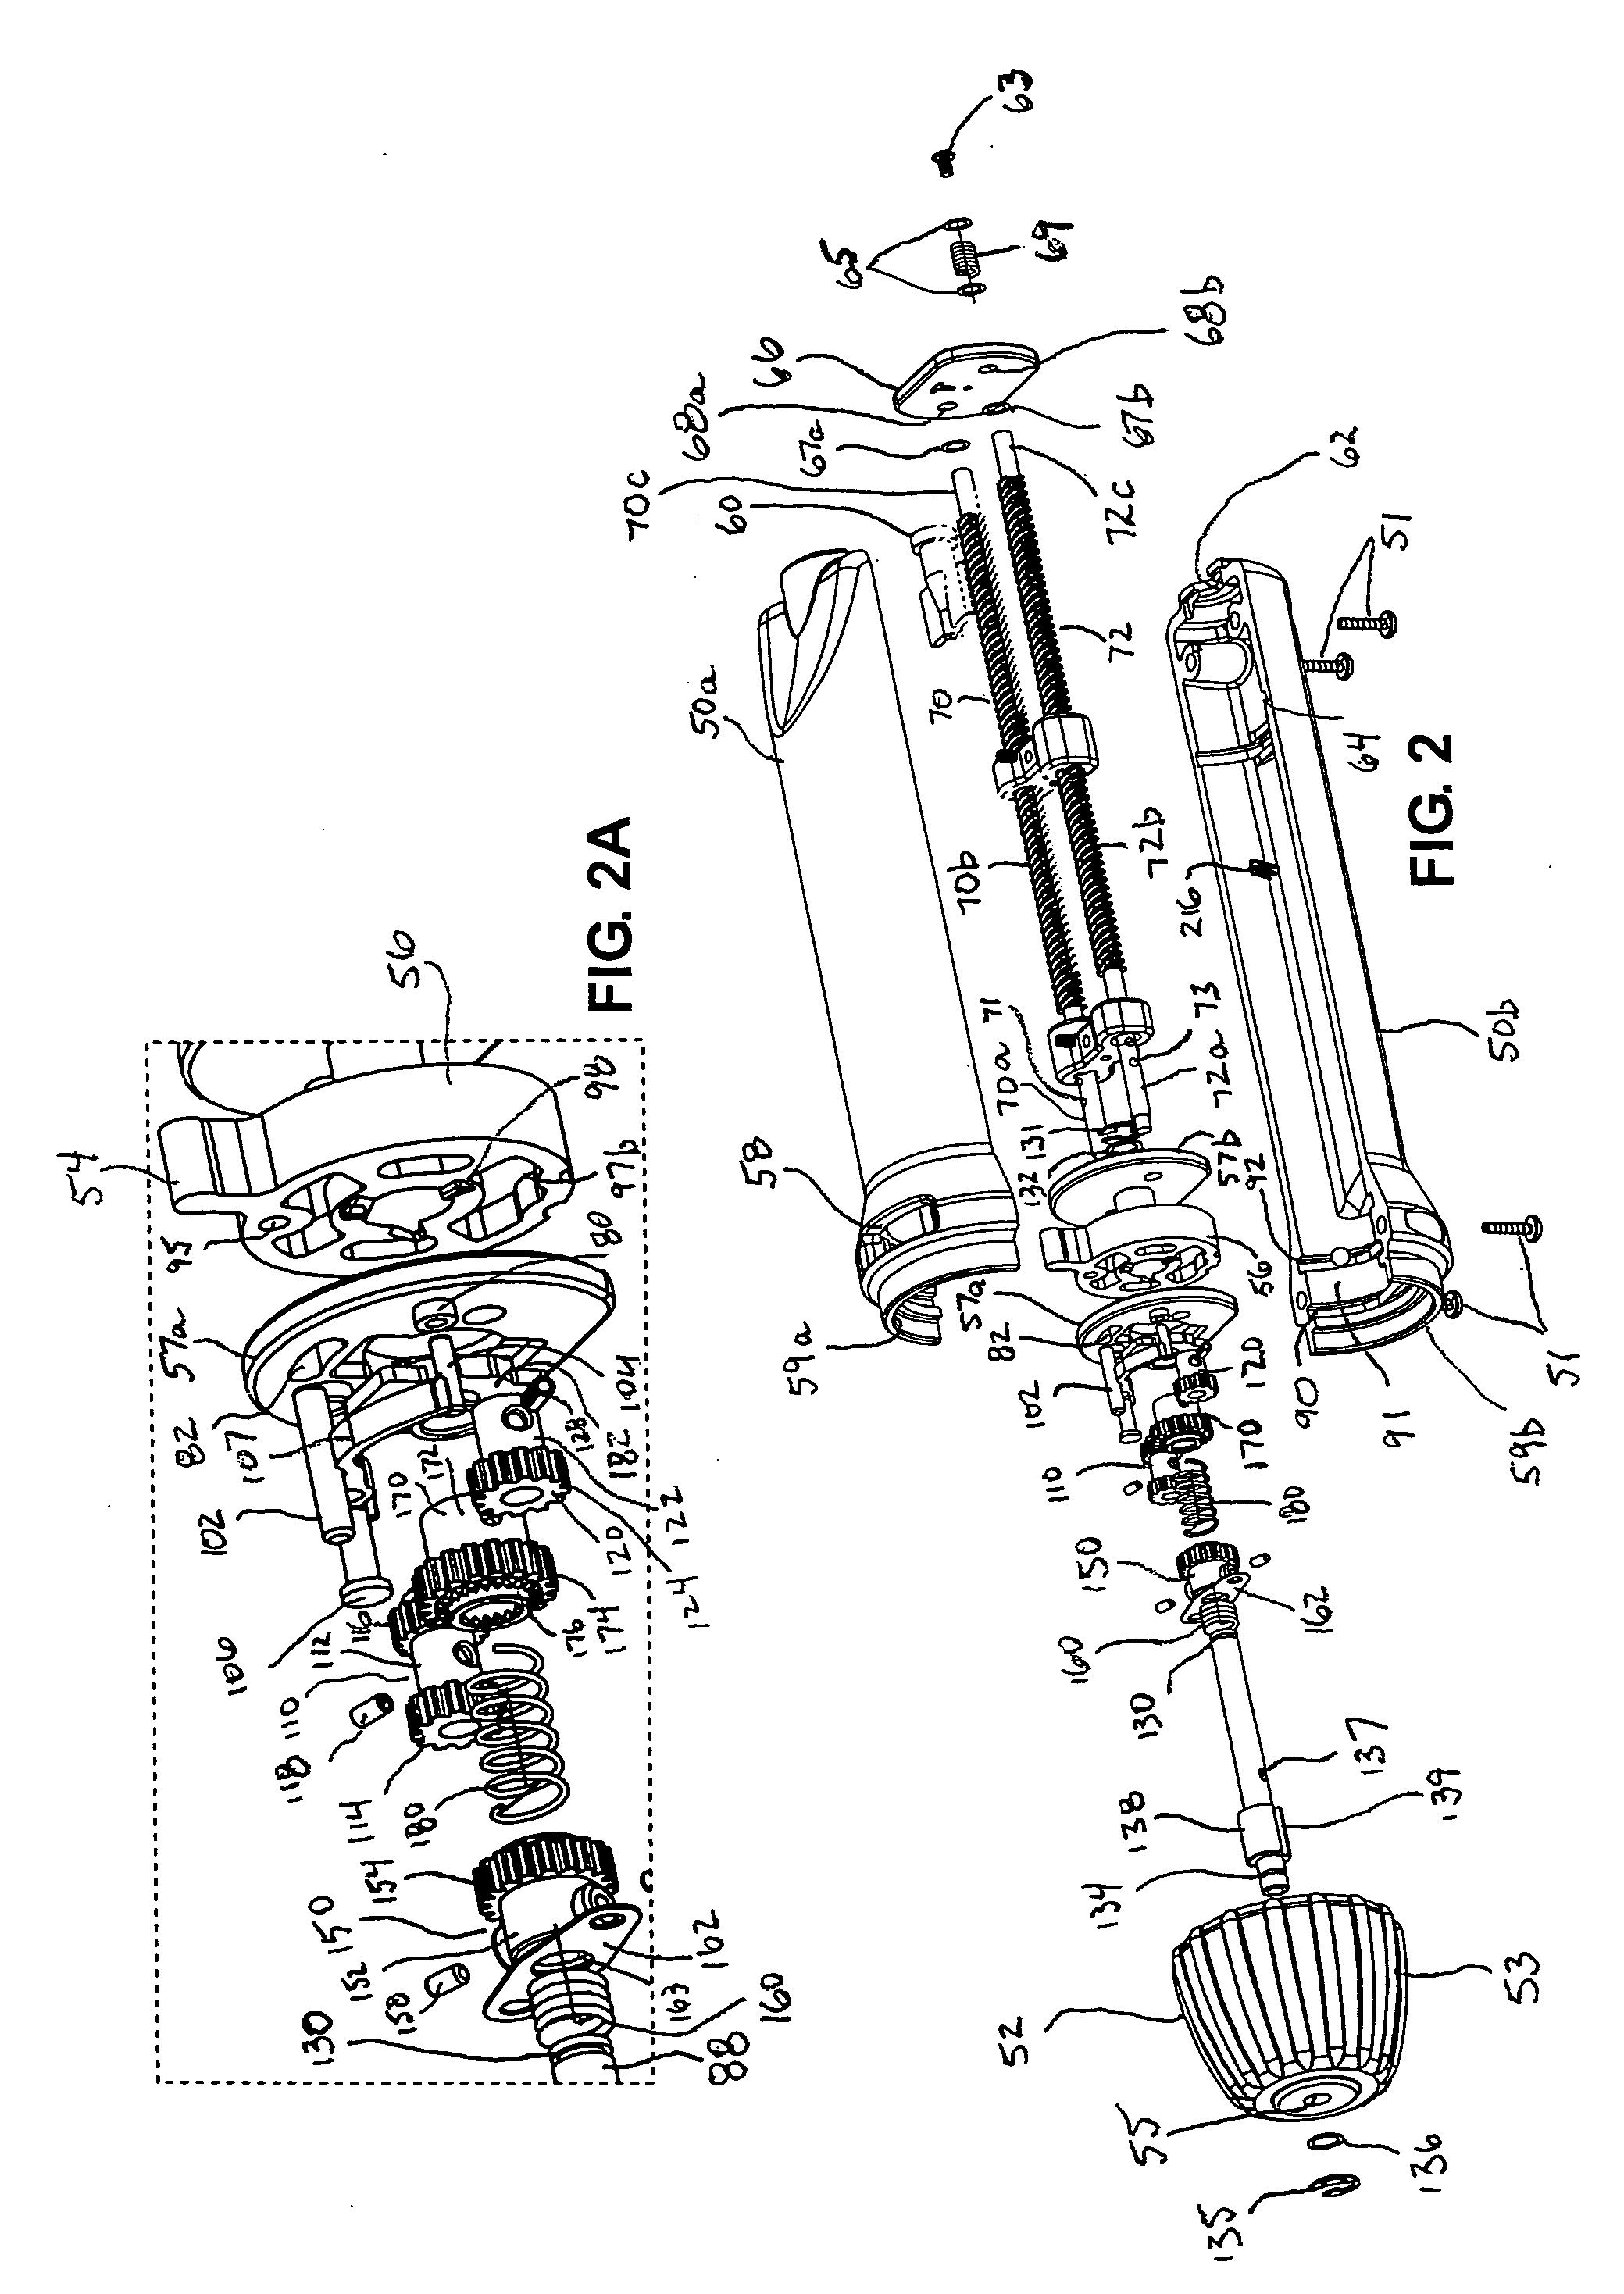 Devices and methods for operating and controlling interventional apparatus